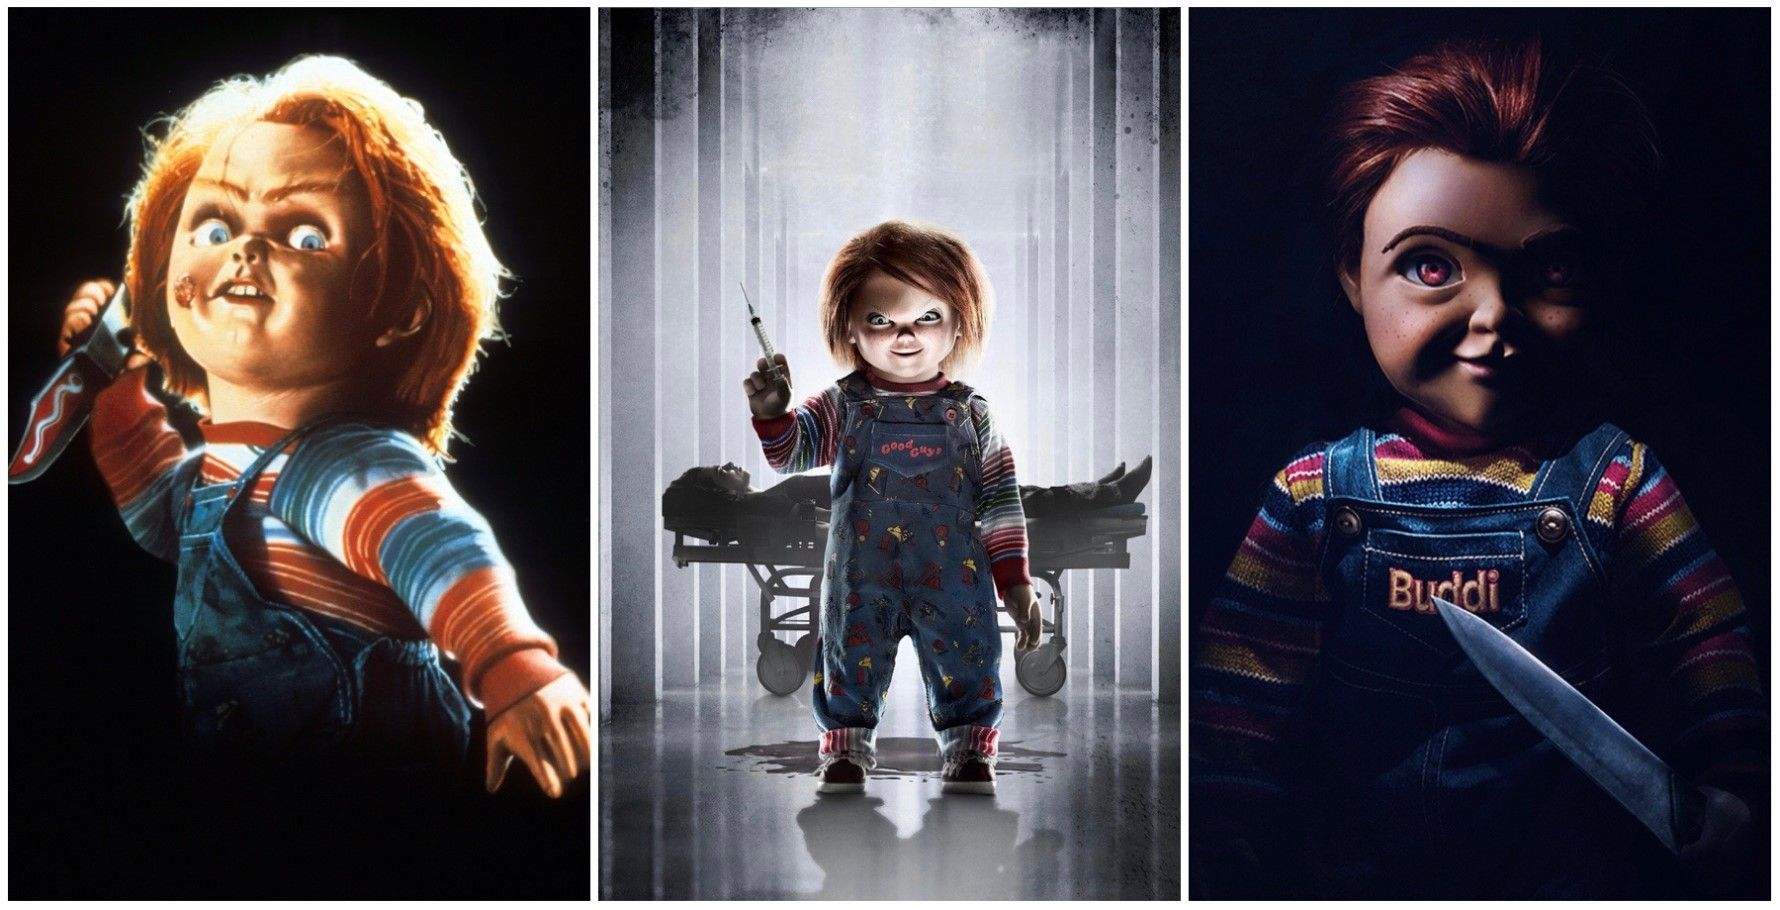 Ranking All The Child's Play Movies (Based On Their Rotten Tomatoes Scores)